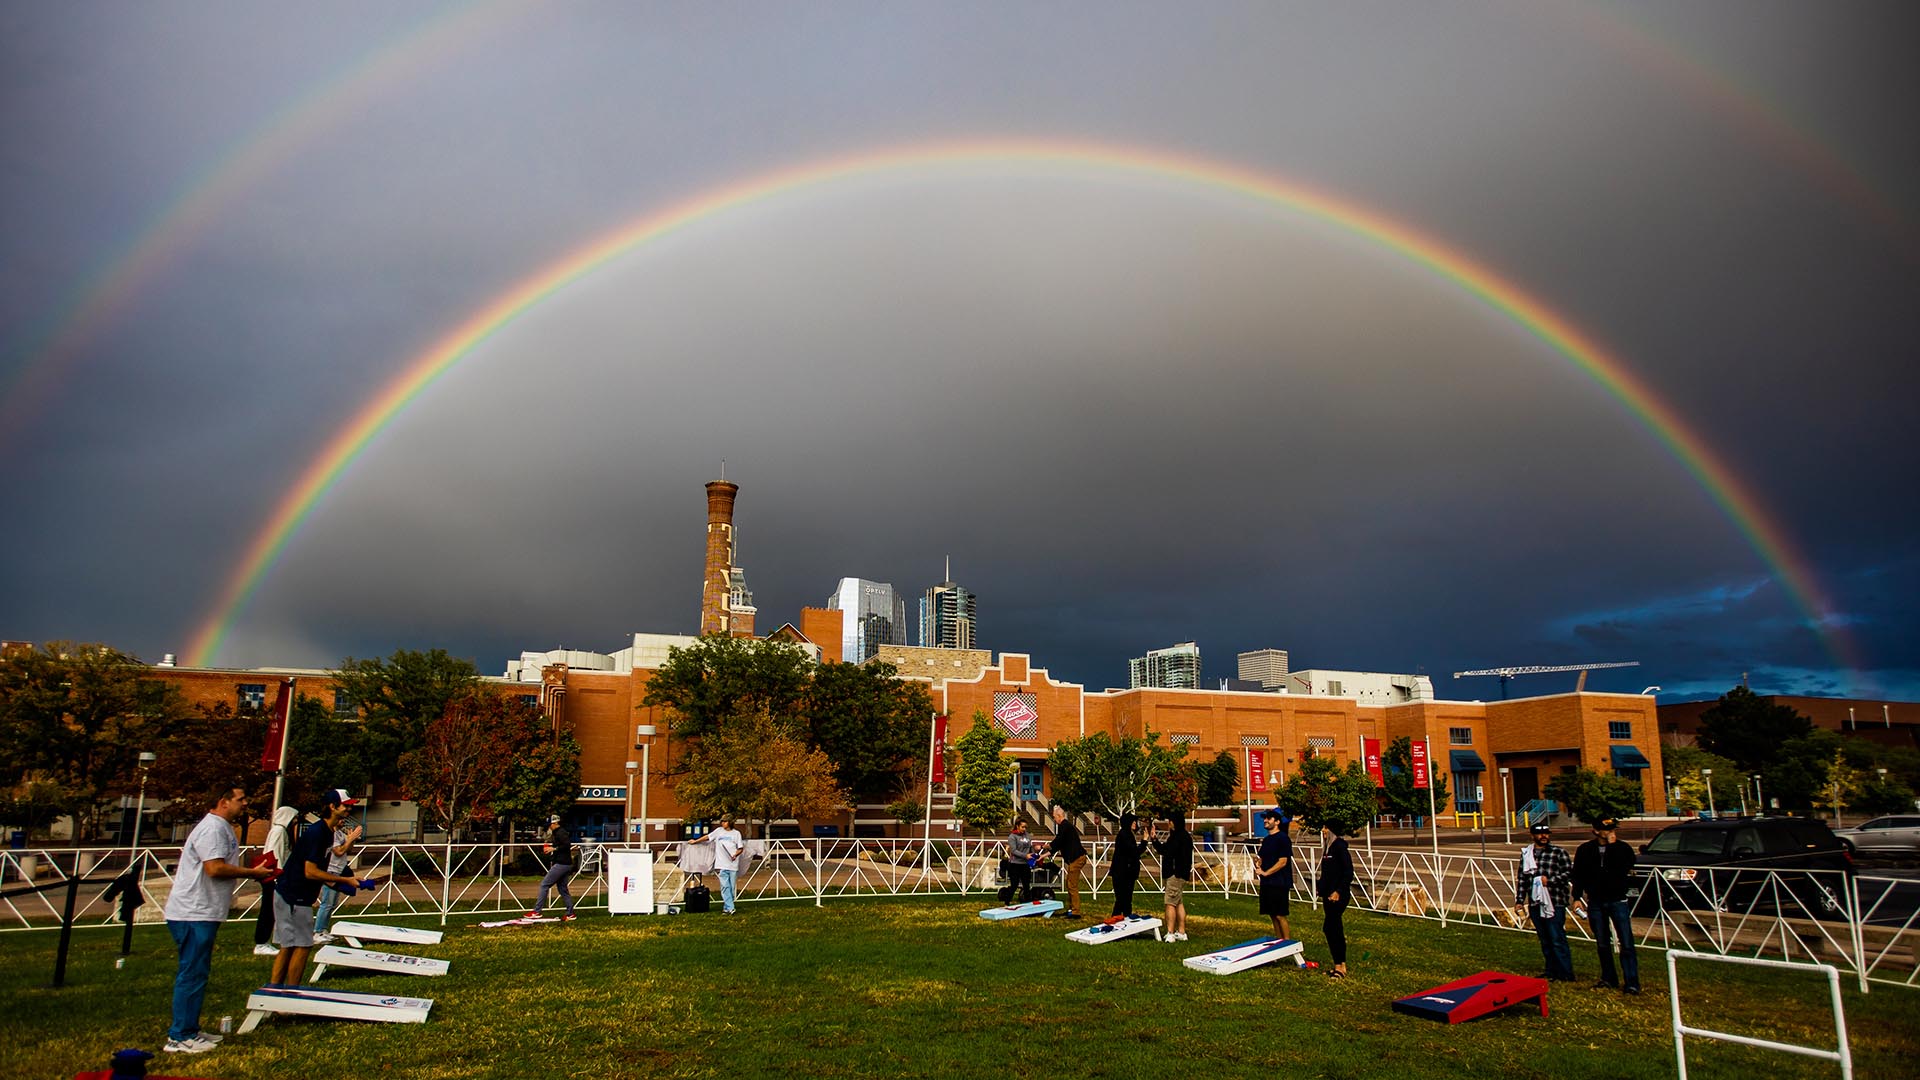 A double rainbow appears over the Homecoming event.